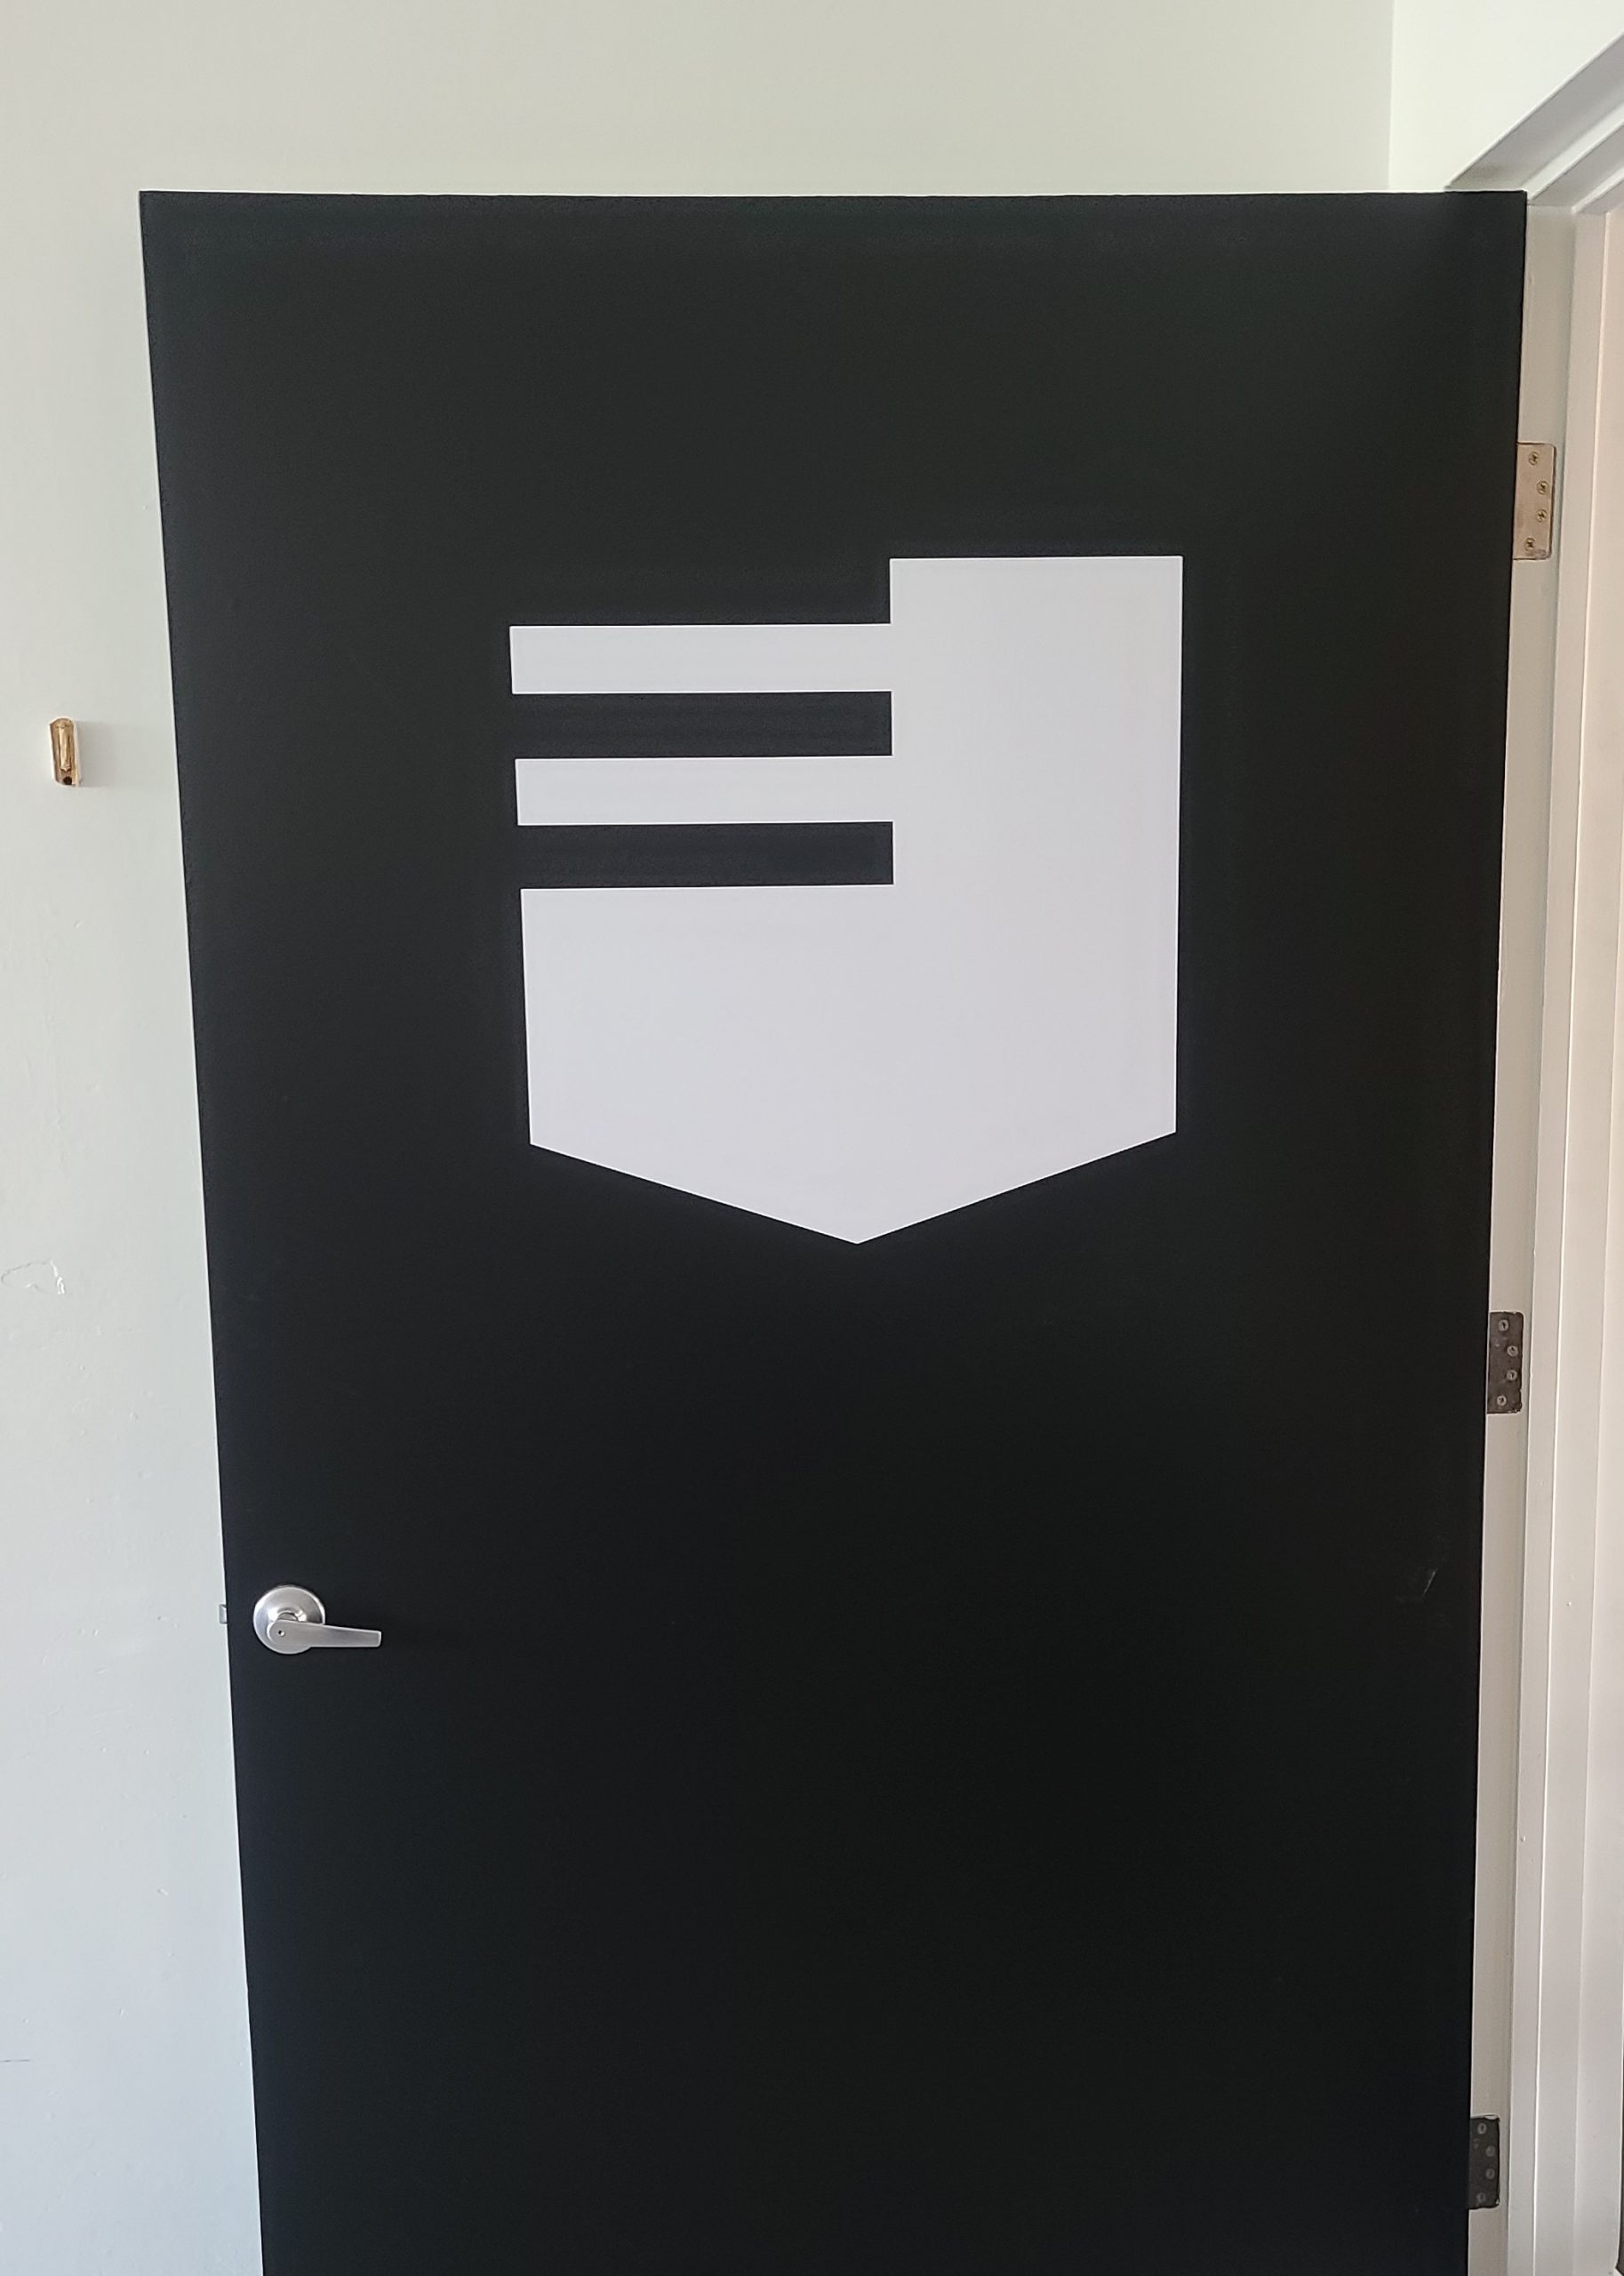 Door graphics for Esser's gym, giving them a memorable entrance sign, so their brand will be prominent for customers going in their Culver City branch.